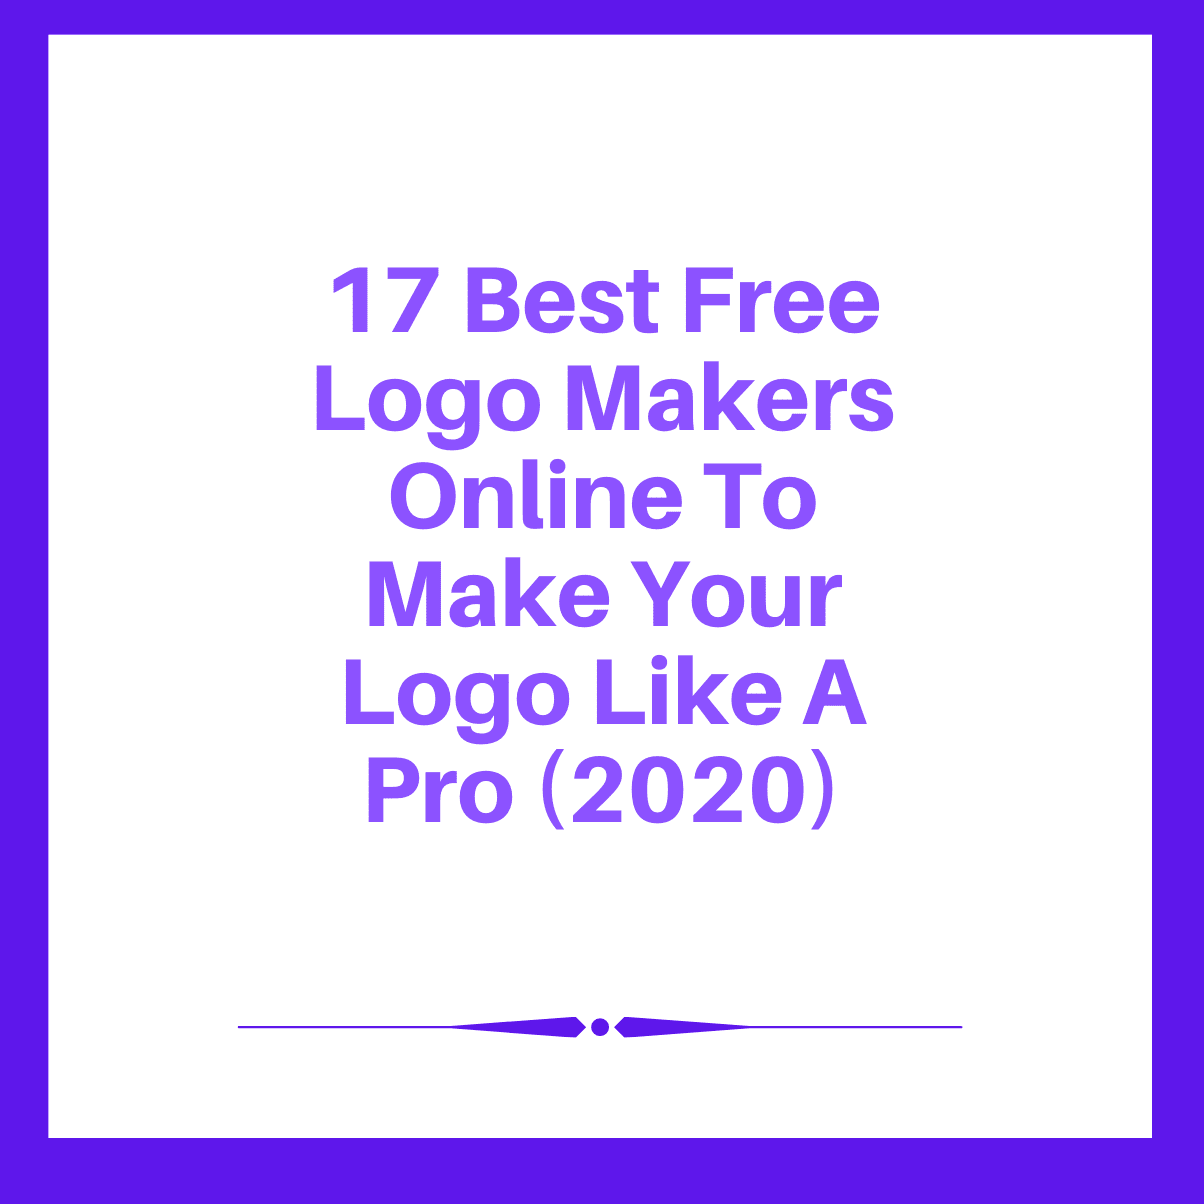 Best Free Logo Makers Online To Make Your Logo Like A Pro (2020)